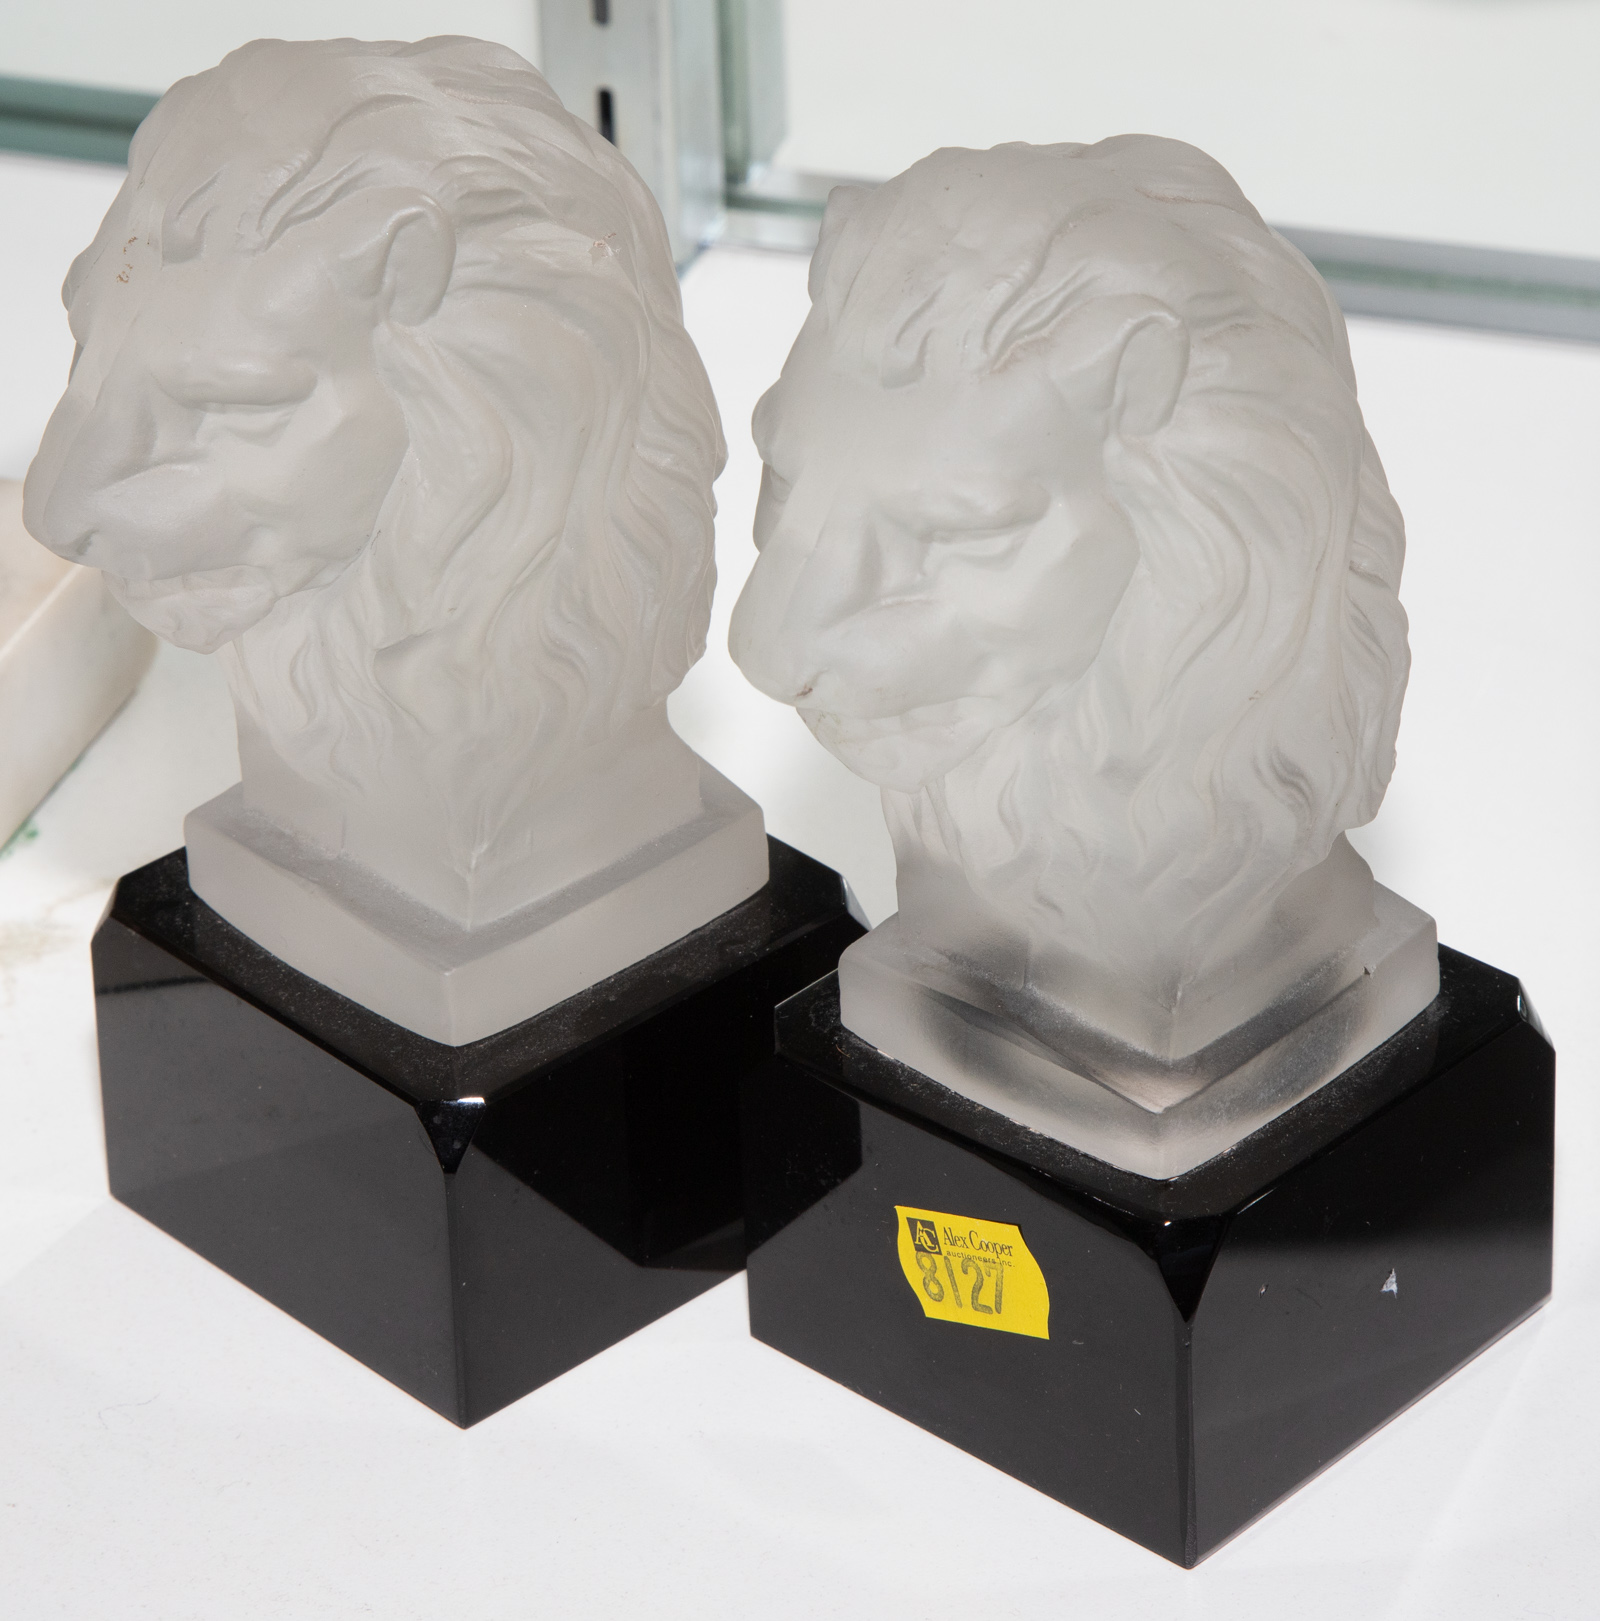 TWO GLASS LION BUSTS 2nd quarter,